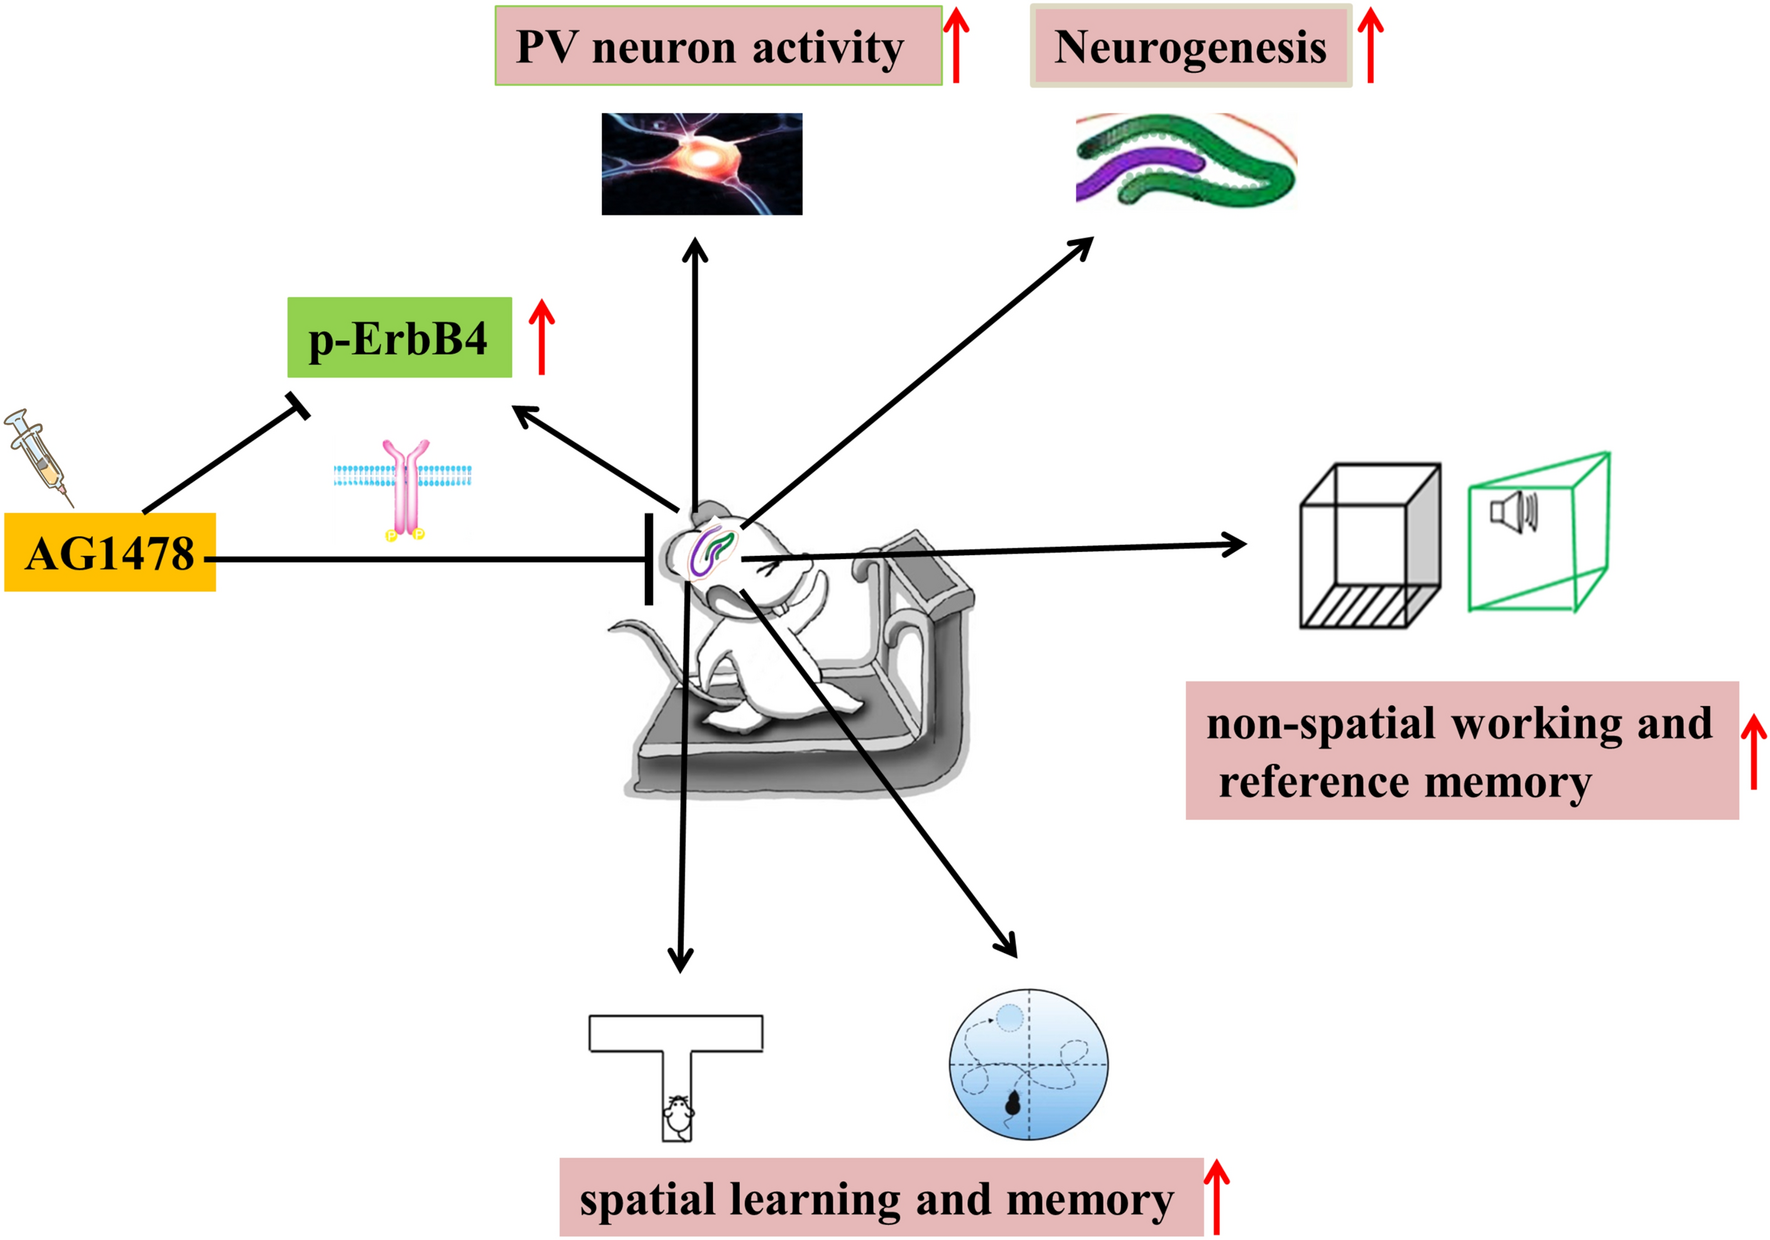 Treadmill Running Regulates Adult Neurogenesis, Spatial and Non-spatial Learning, Parvalbumin Neuron Activity by ErbB4 Signaling